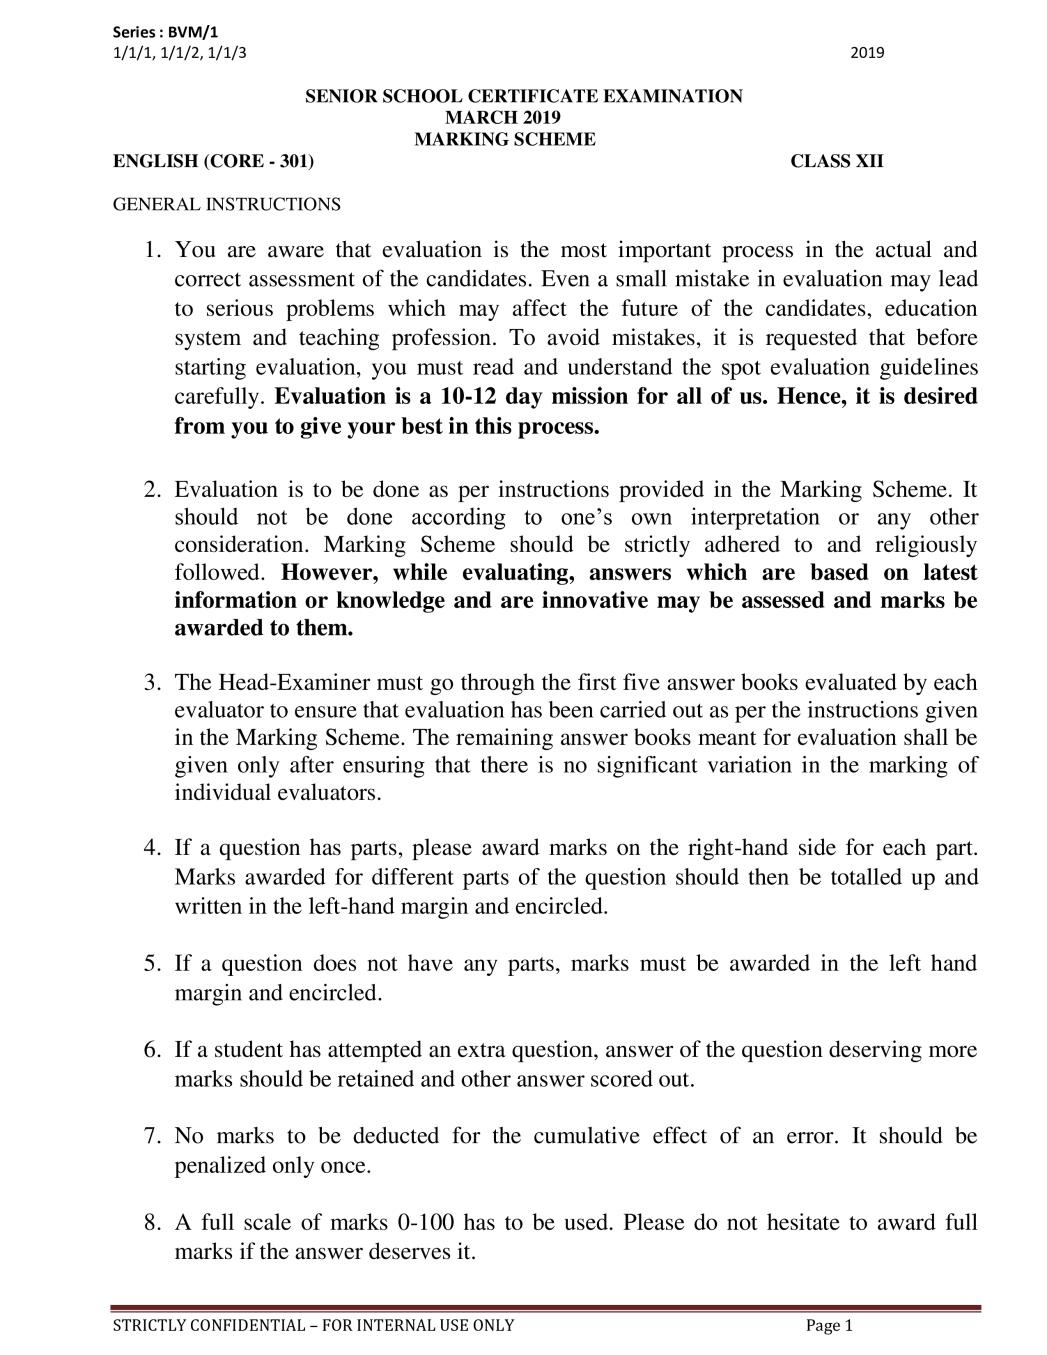 CBSE Class 12 English Core Question Paper 2019 Set 1 Solutions - Page 1